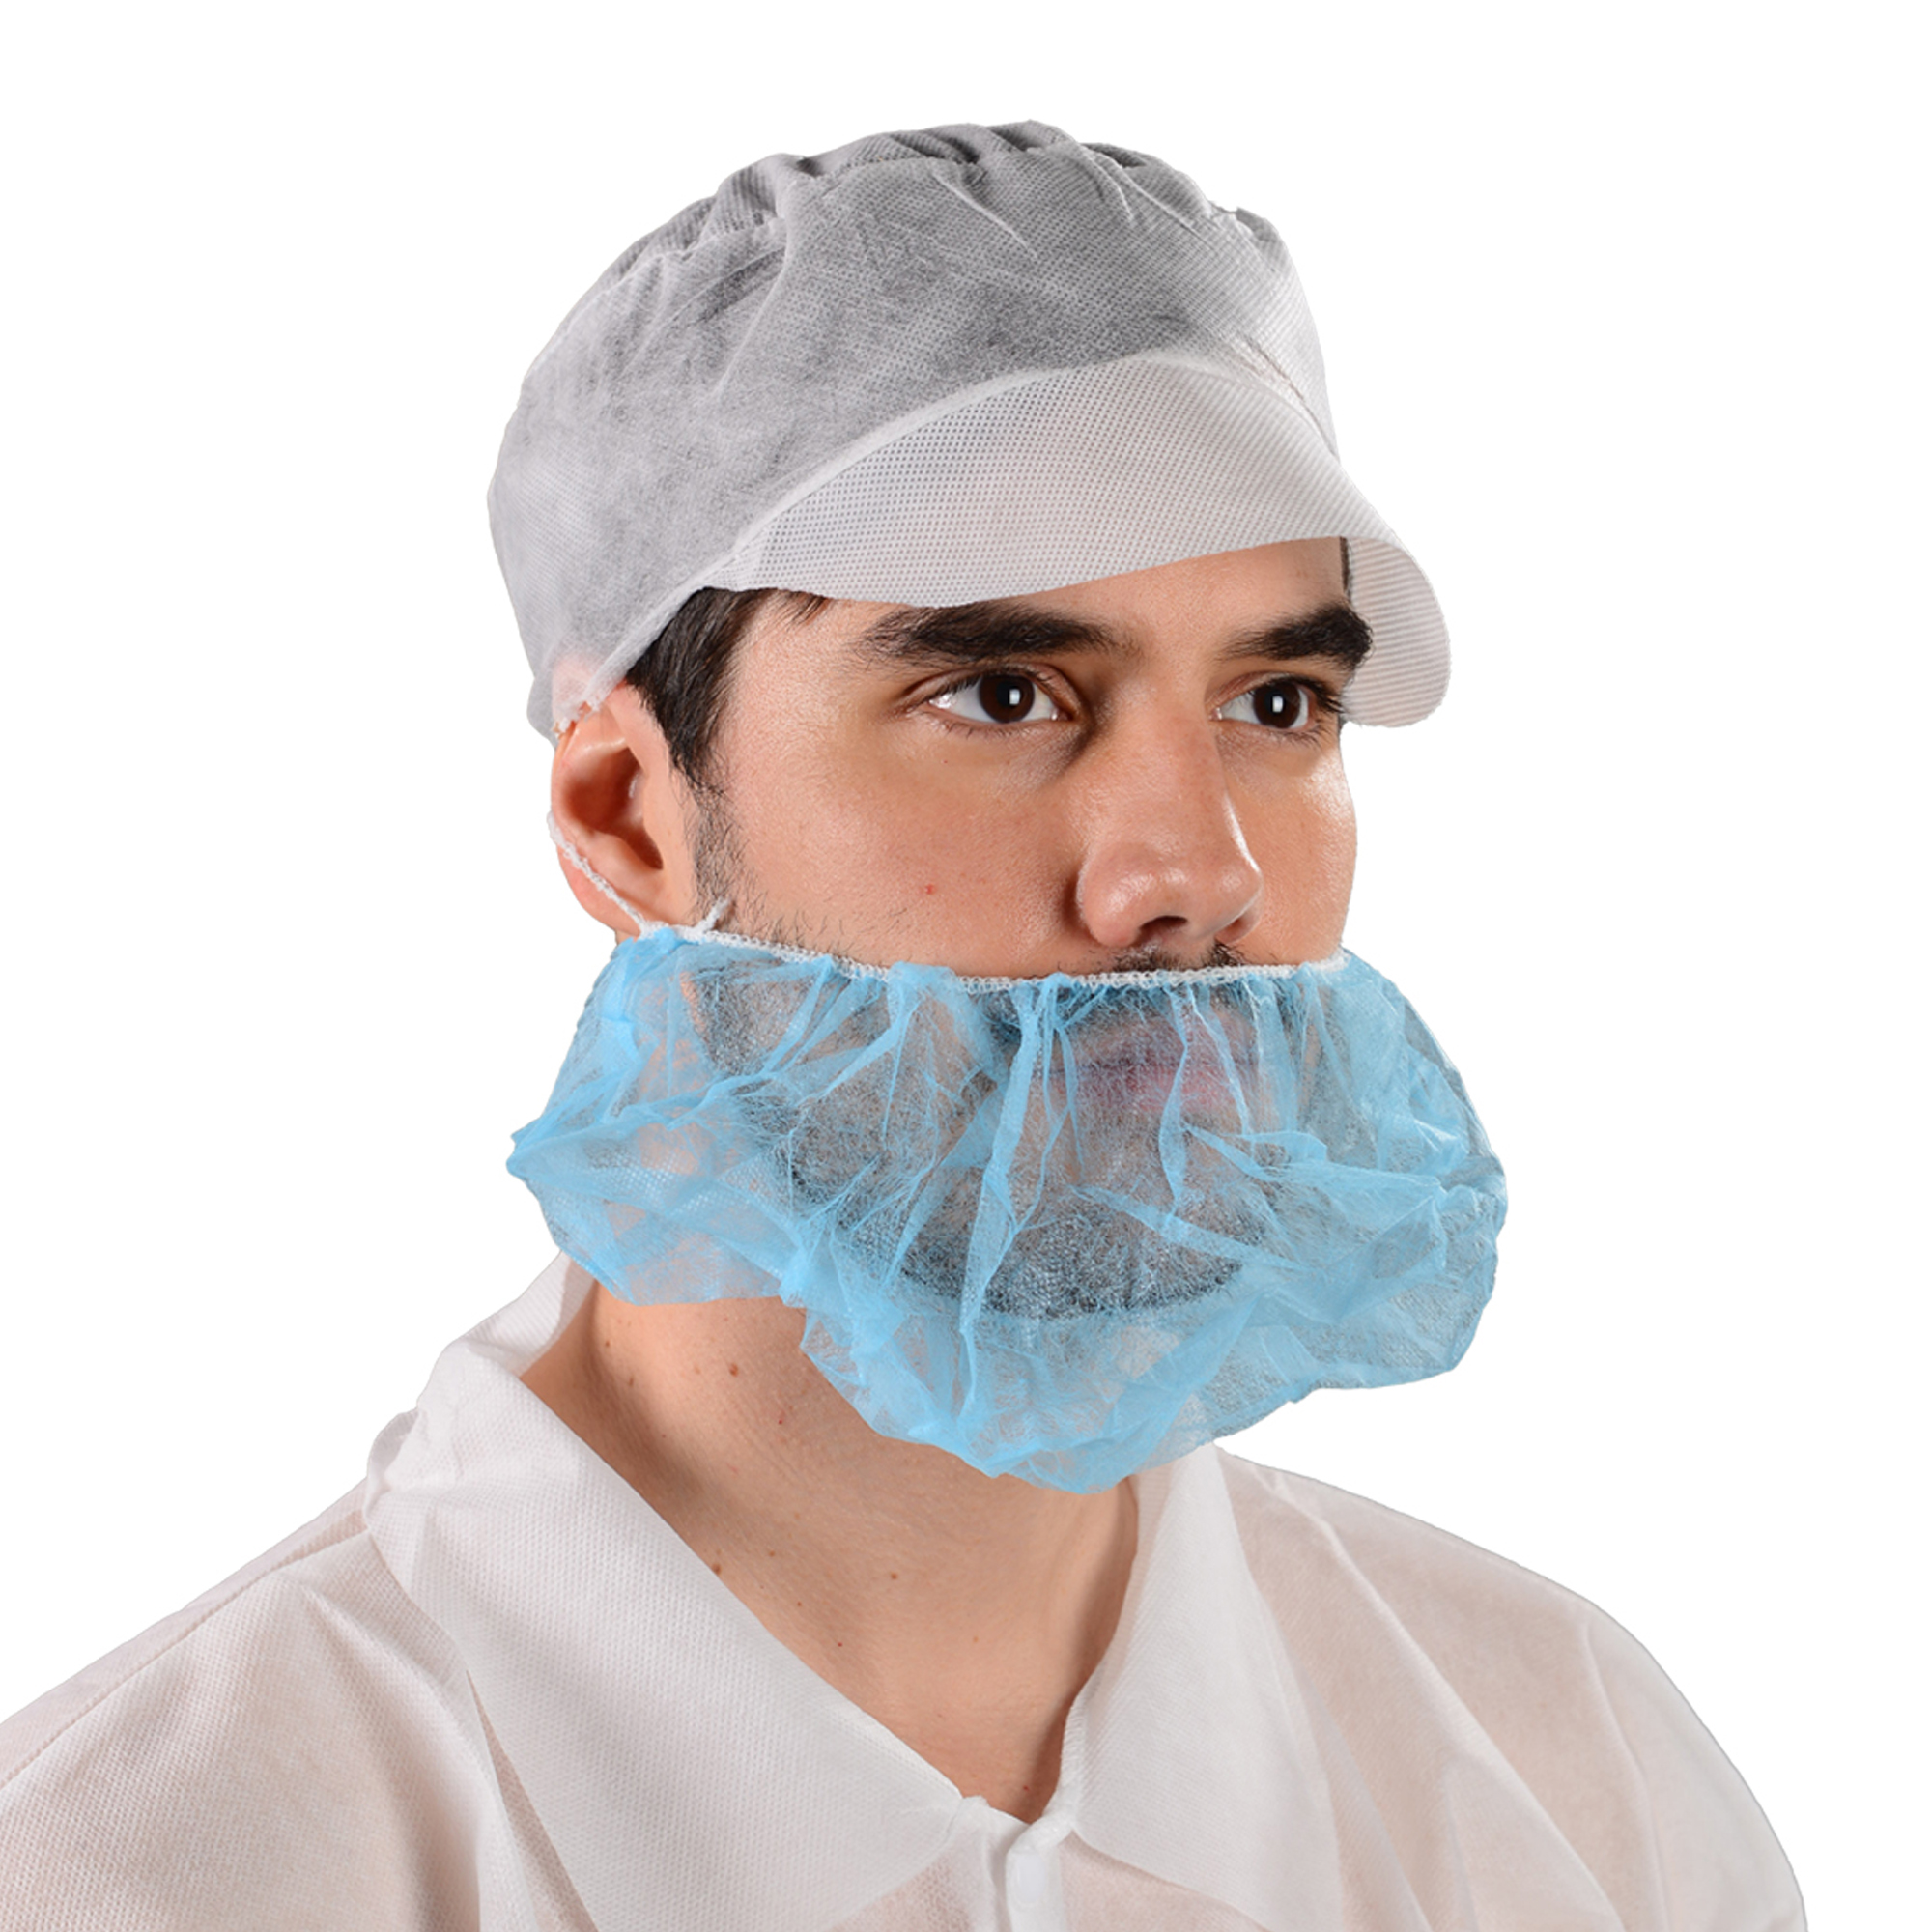 PP Nonwoven Disposable Food Industry Single Loop Dust Proof Beard Hair Net 10gsm White Beard Cover